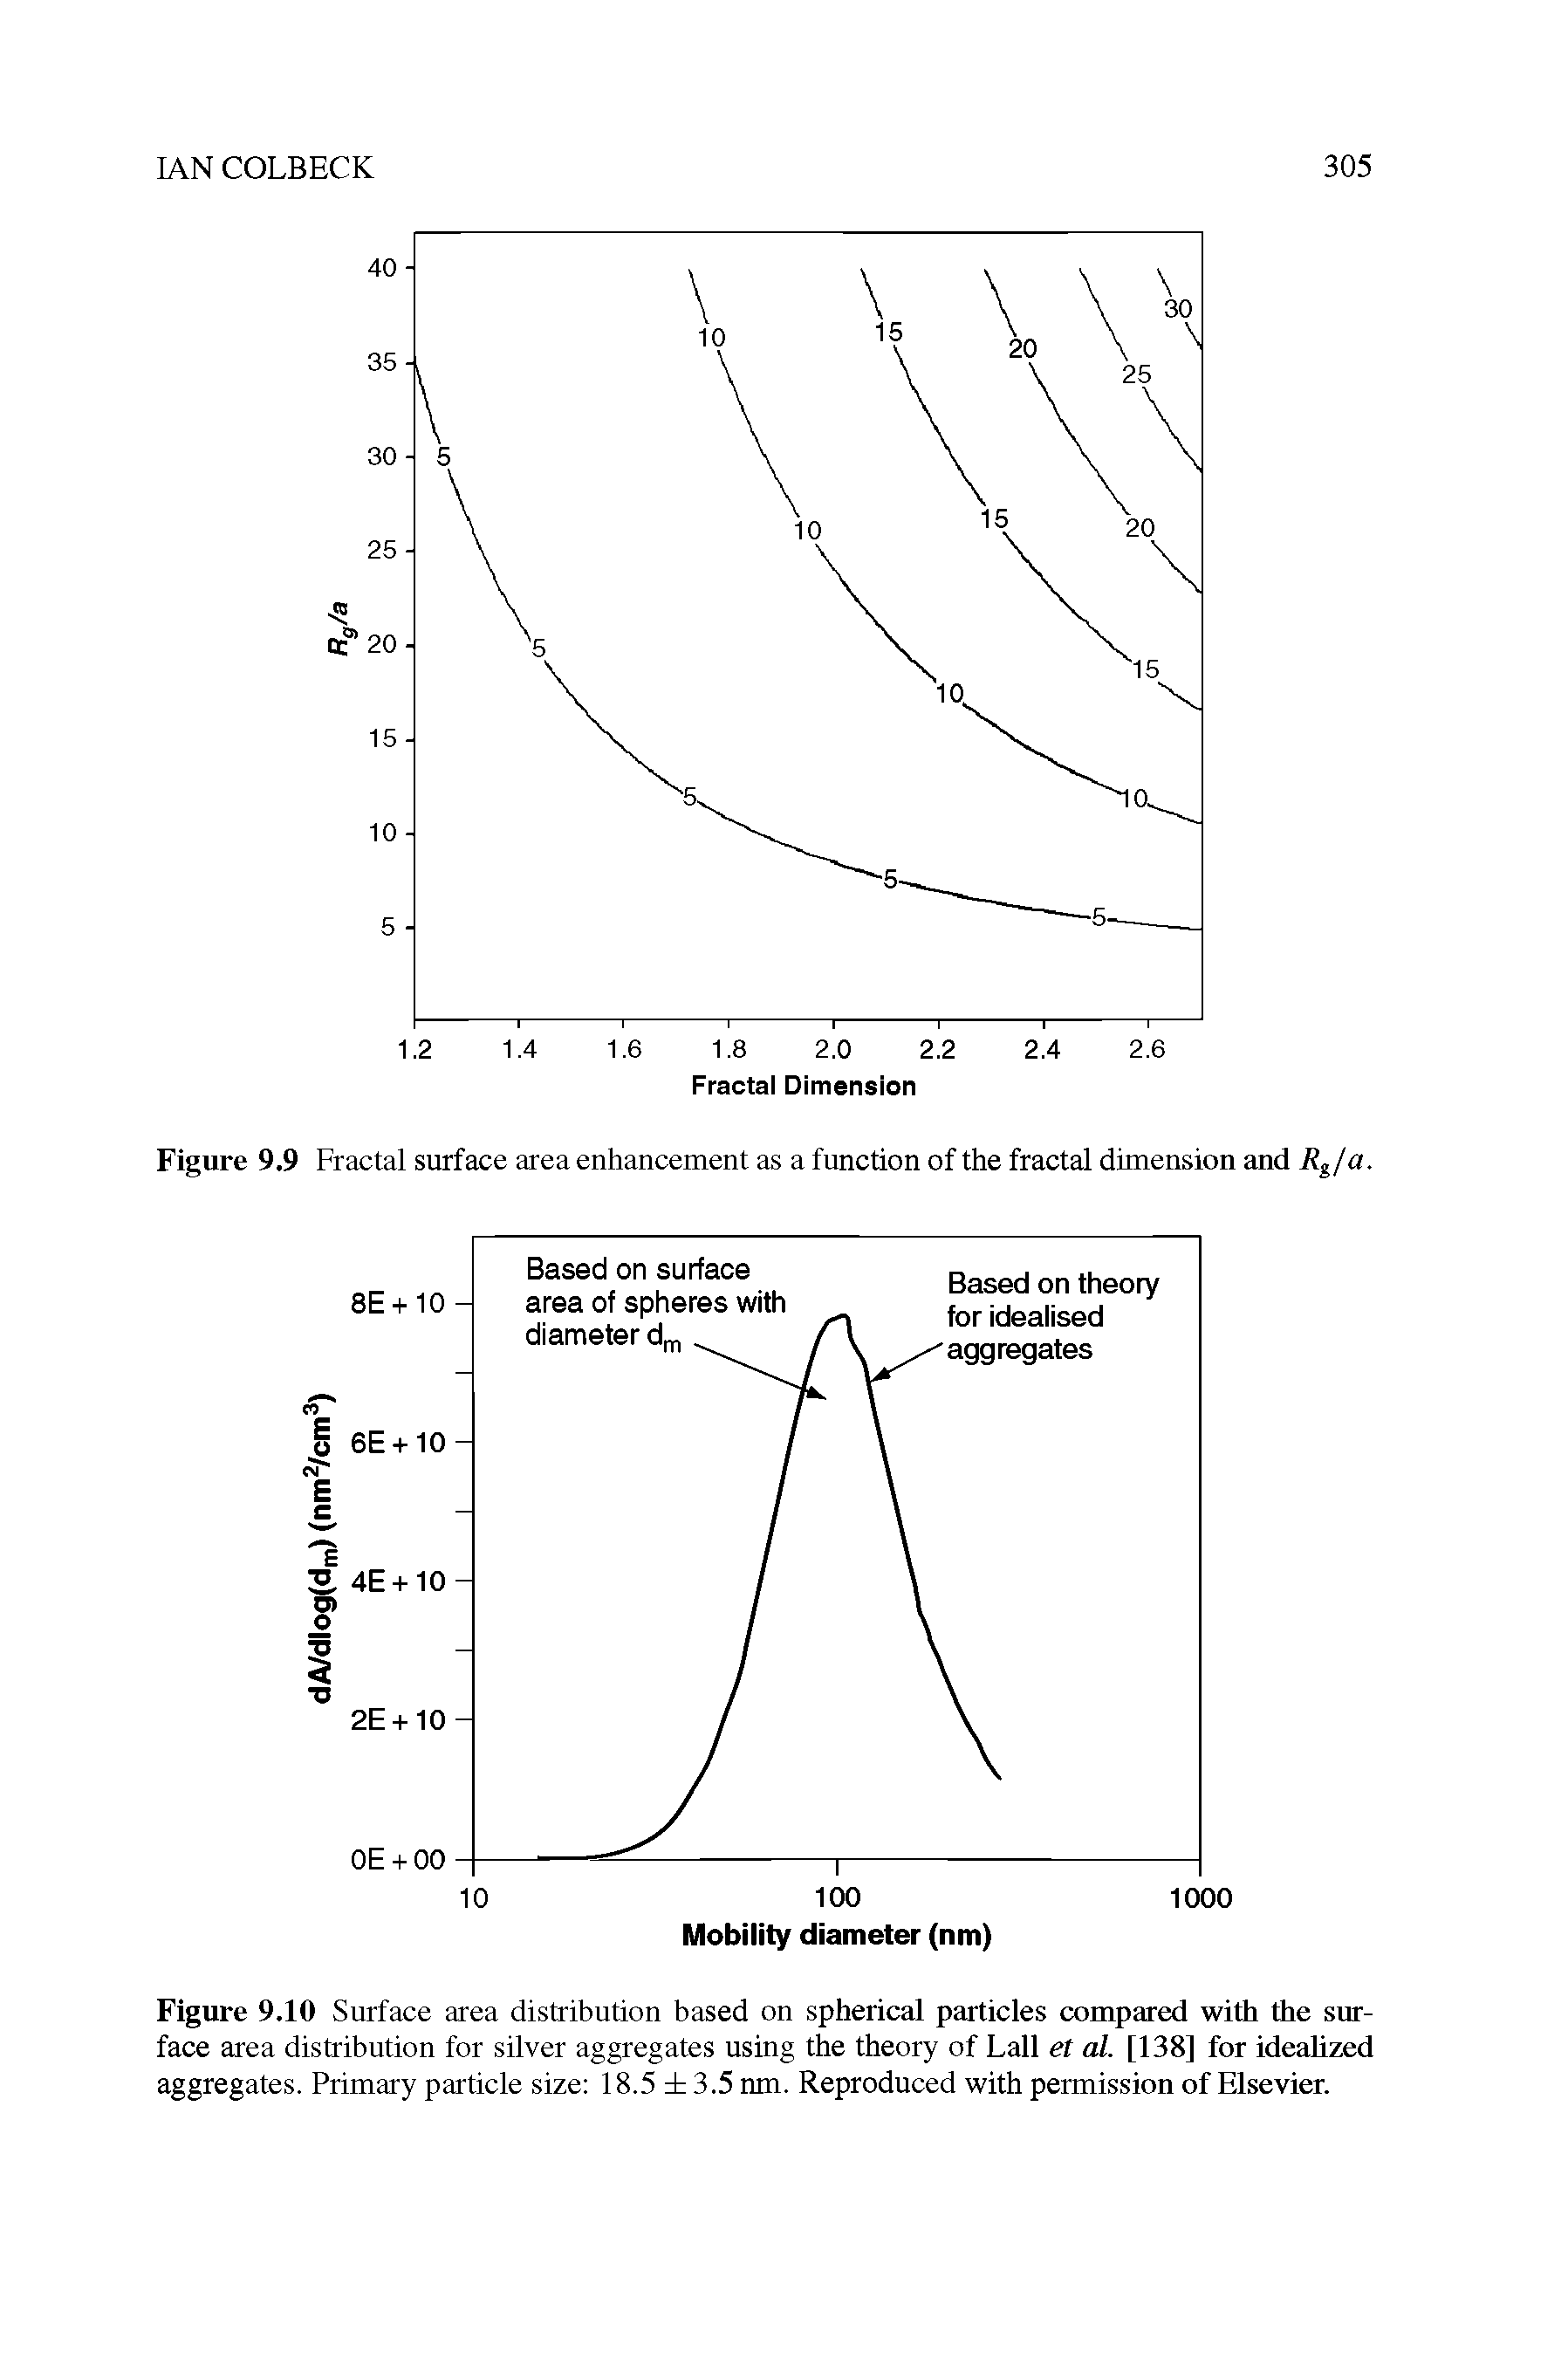 Figure 9.10 Surface area distribution based on spherical particles compared with the surface area distribution for silver aggregates using the theory of Lall et al. [138] for idealized aggregates. Primary particle size 18.5 3.5 nm. Reproduced with permission of Elsevier.